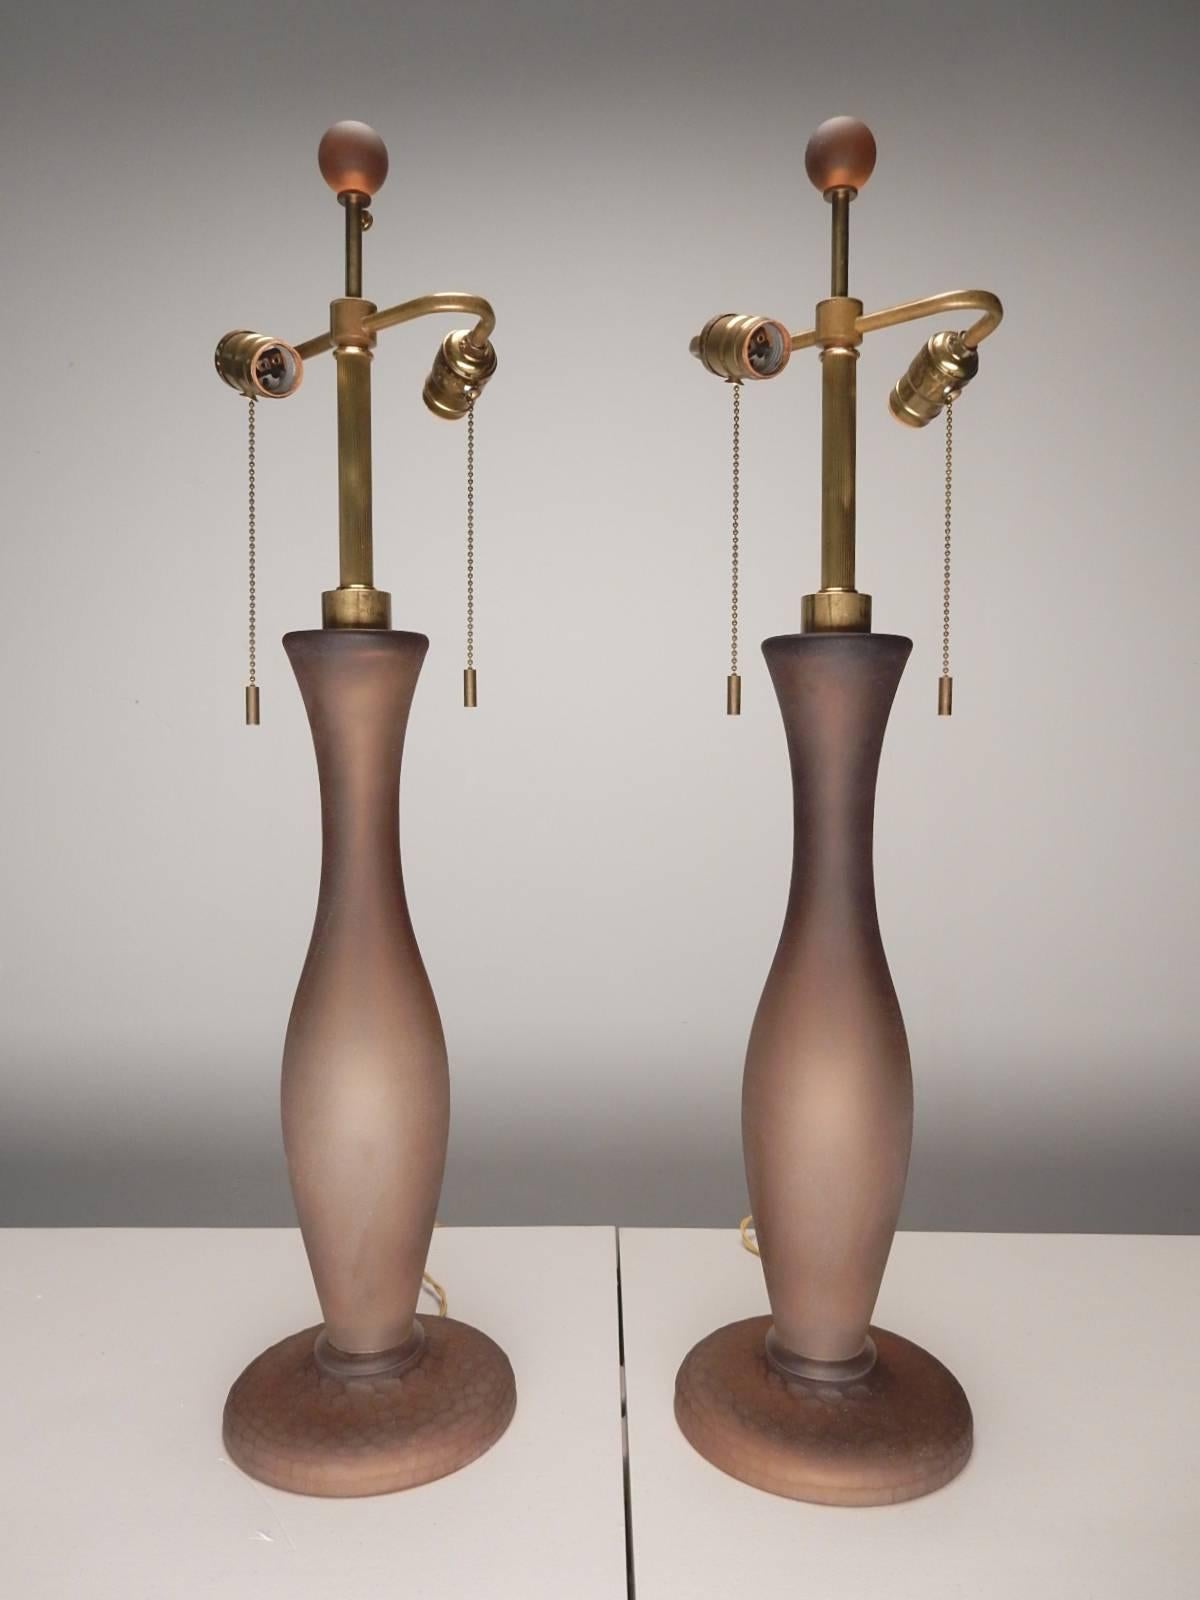 Gorgeous Venetian taupe art glass table lamps designed by John Hutton for Donghia Inc.
Handblown glass lamps with a sandblasted surface.
 